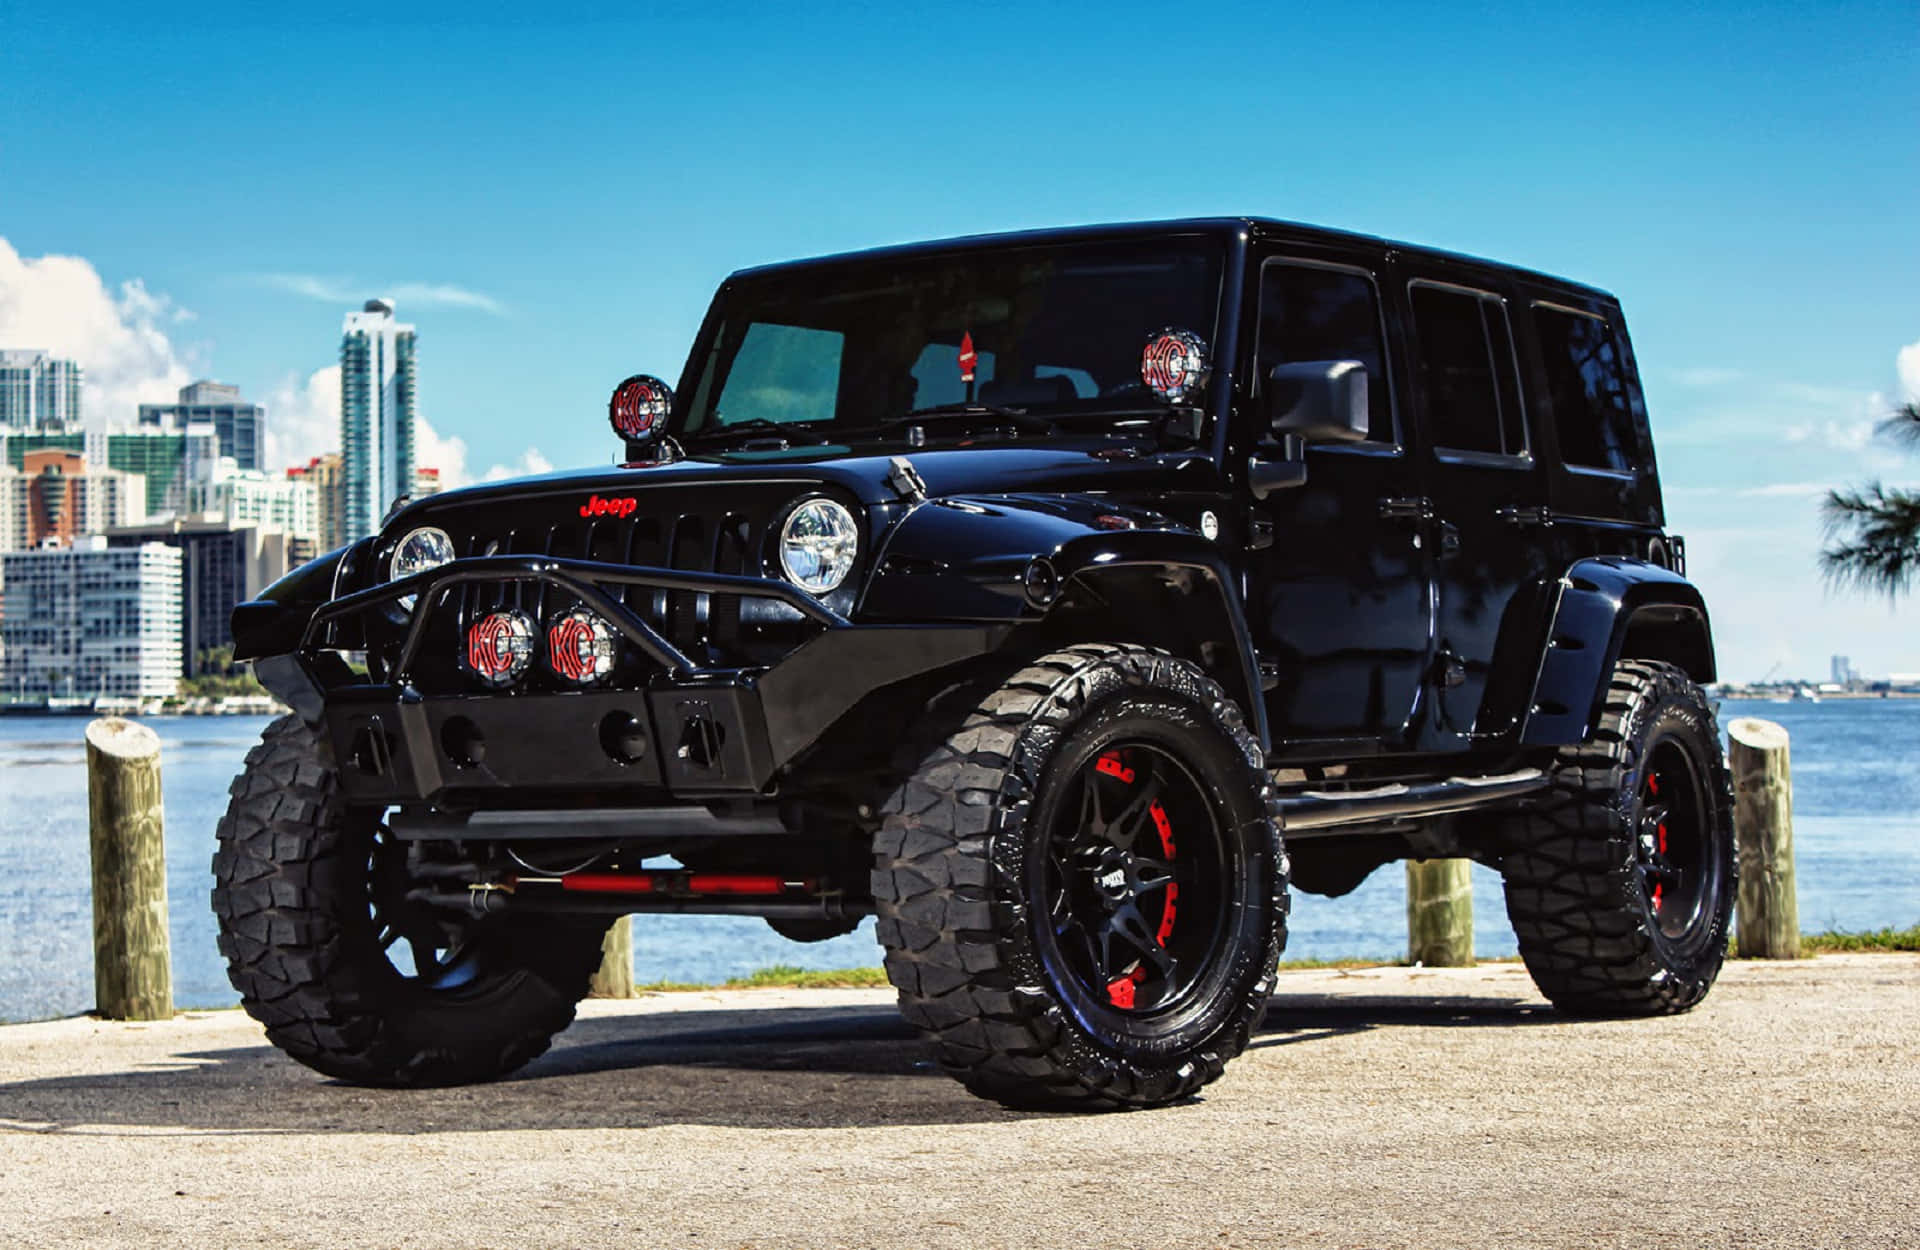 Upgrade Your Adventure with the Rugged Black Jeep